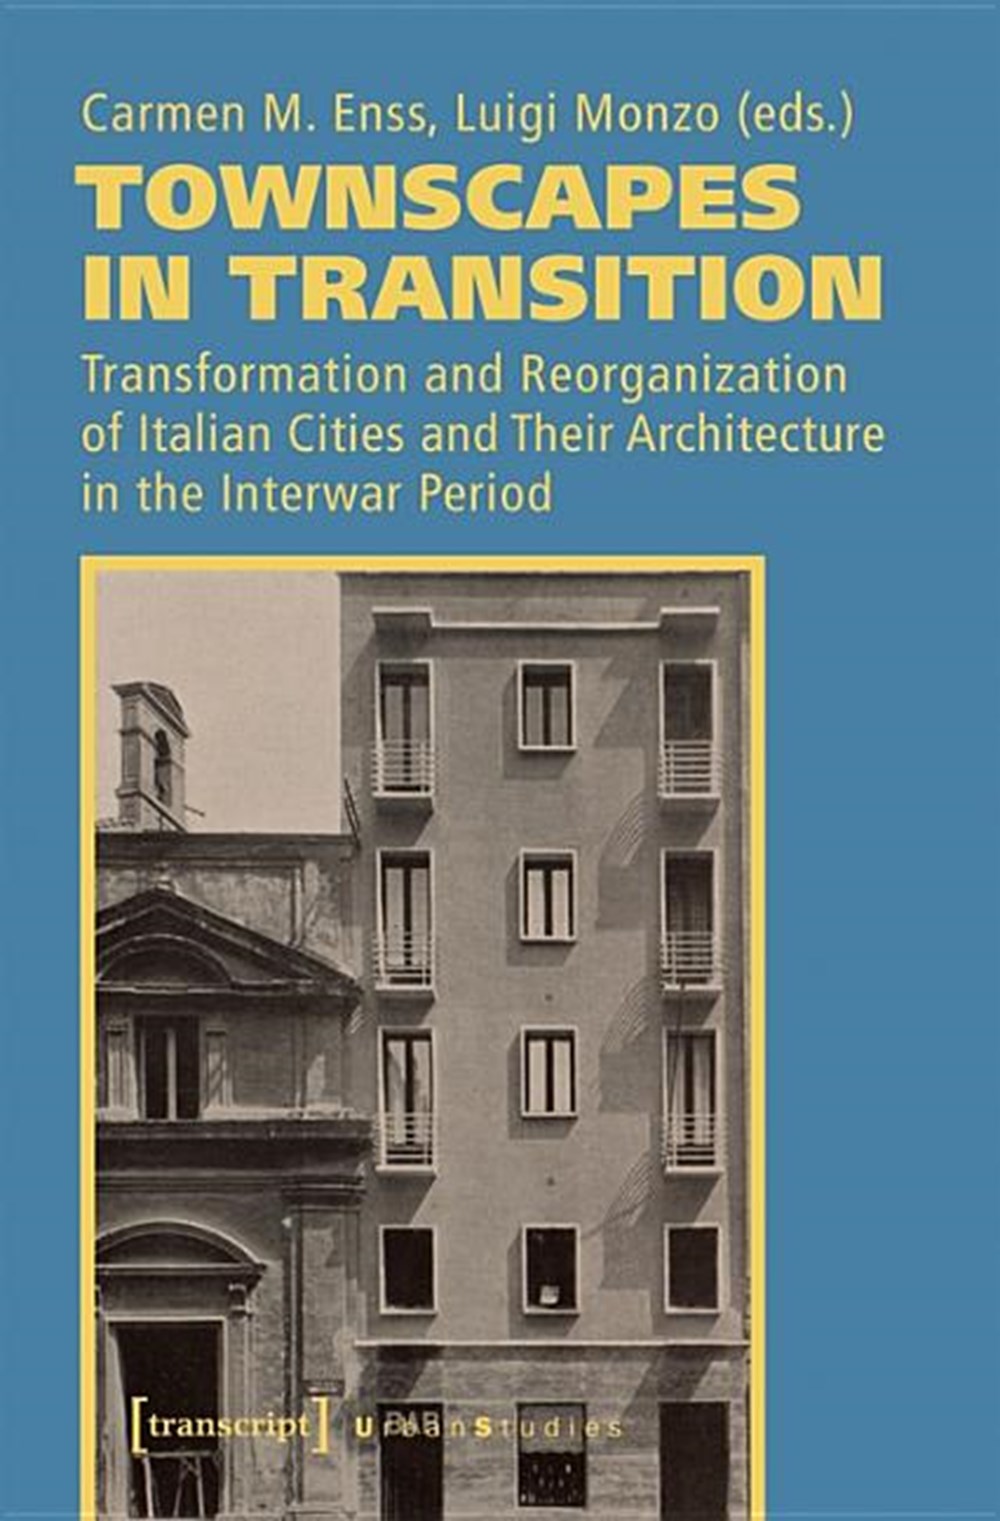 Townscapes in Transition: Transformation and Reorganization of Italian Cities and Their Architecture